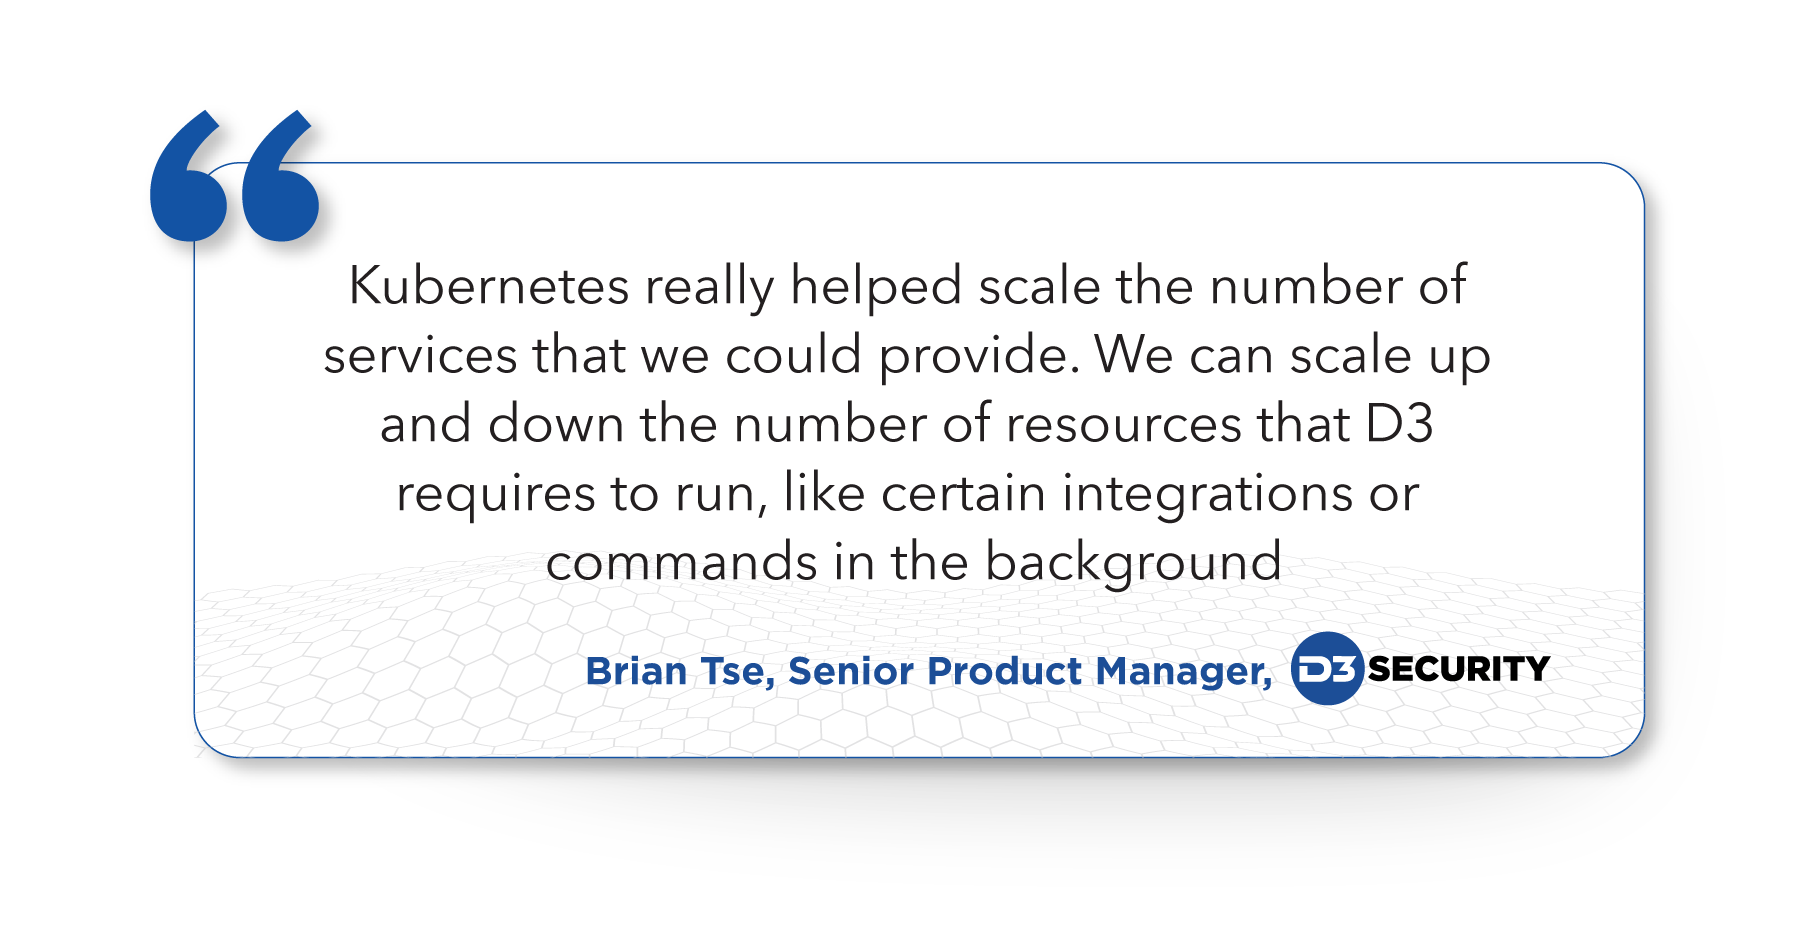 A quote from Brian Tse, Senior Product Manager at D3 Security on D3 Smart SOAR achieves hyperscalability